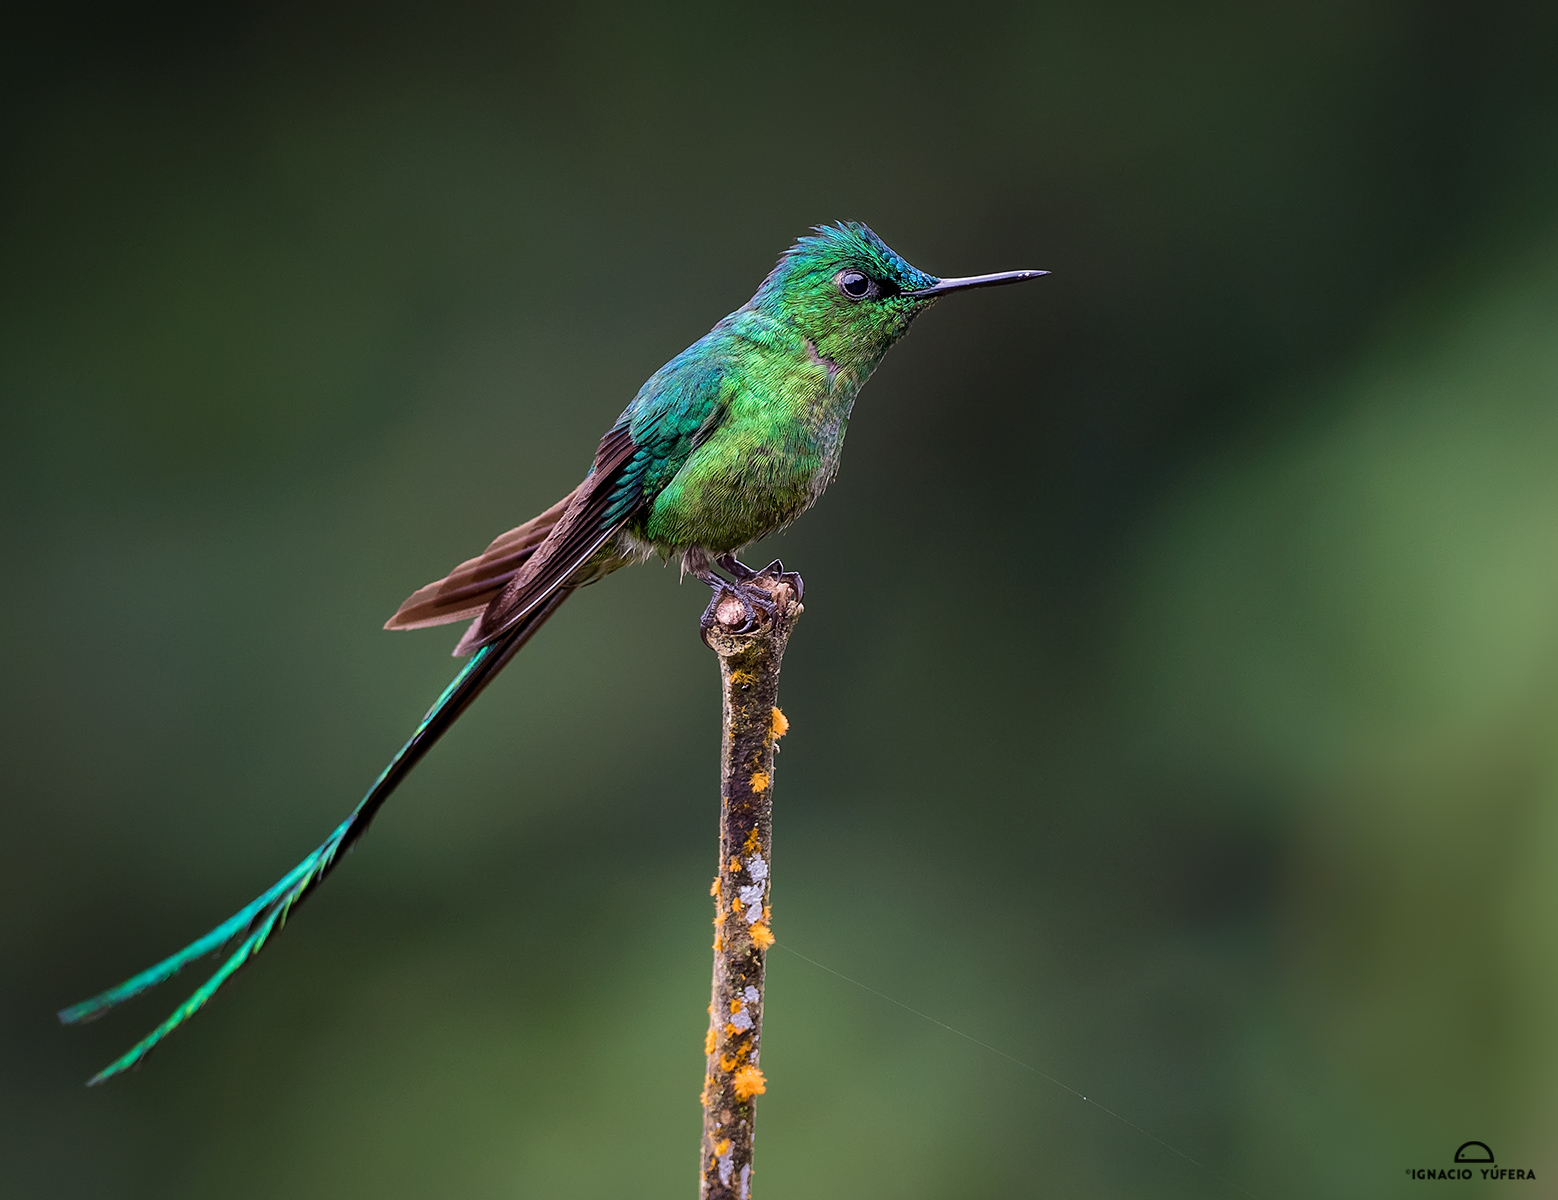 Long-tailed Sylph (Aglaiocercus kingii), female, cauca valley, Colombia